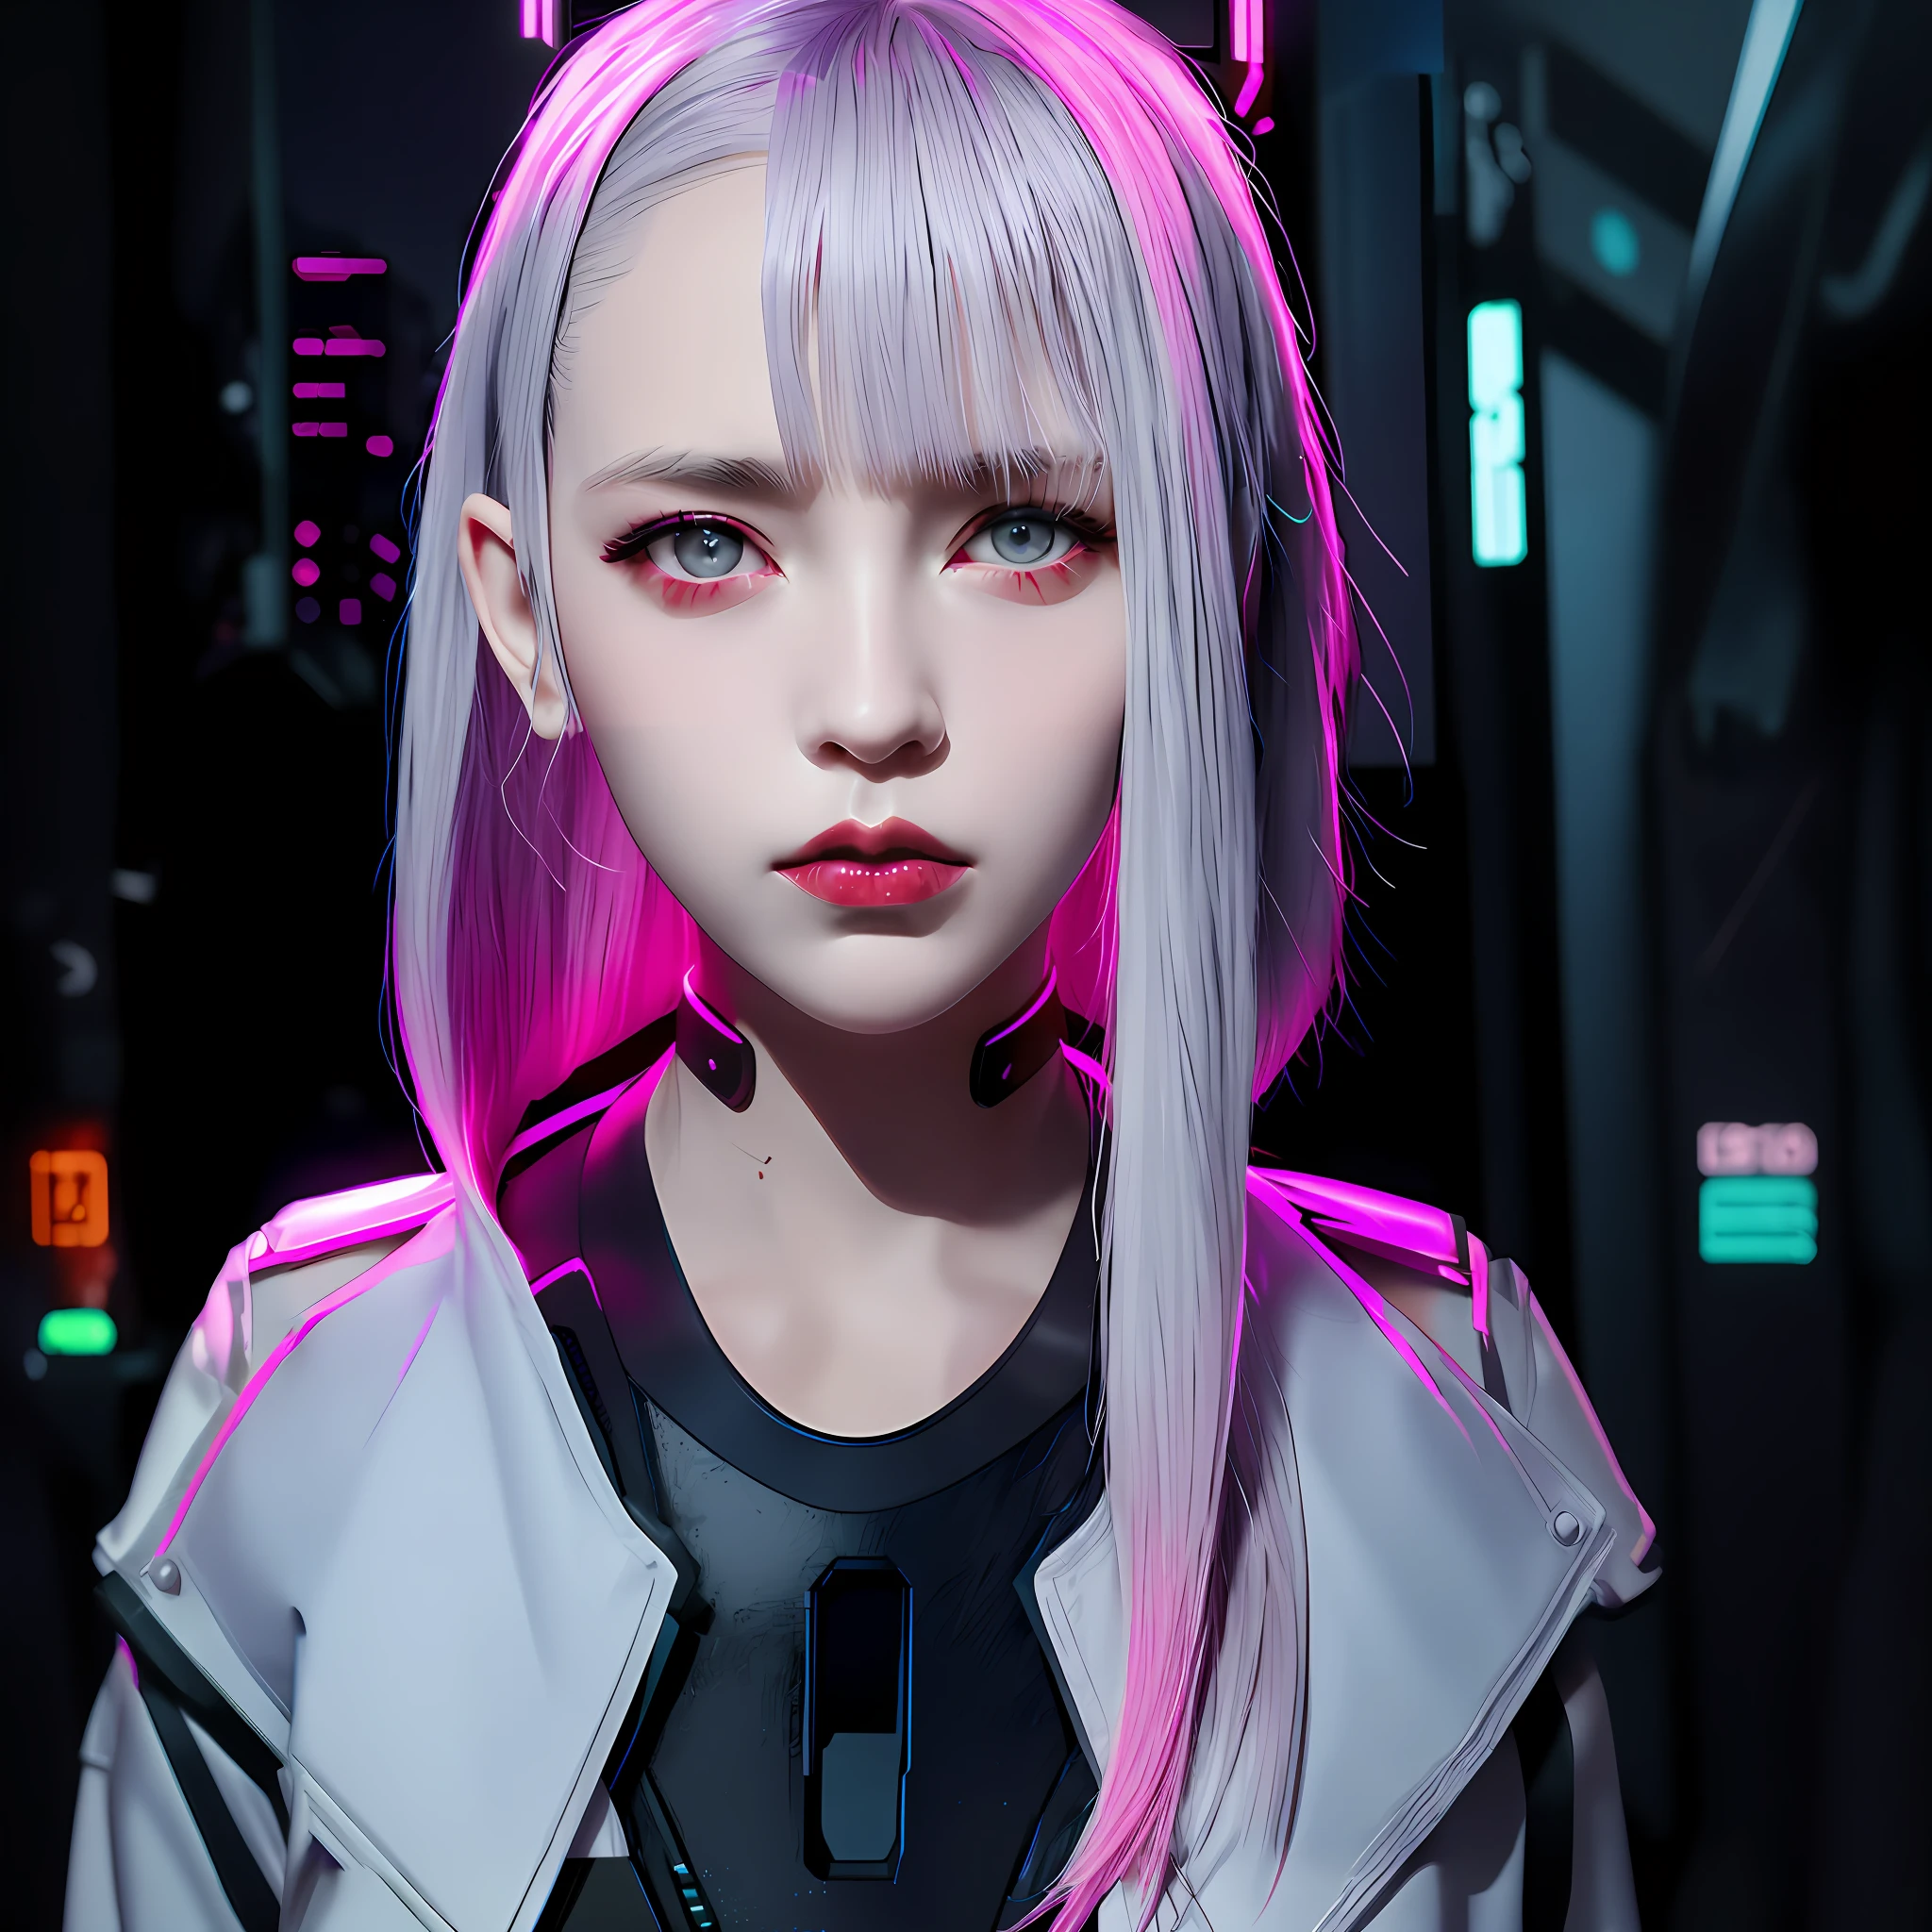 Anime Girl With Pink Hair And A Futuristic Outfit In A City Hyper Realistic Cyberpunk Style 9844